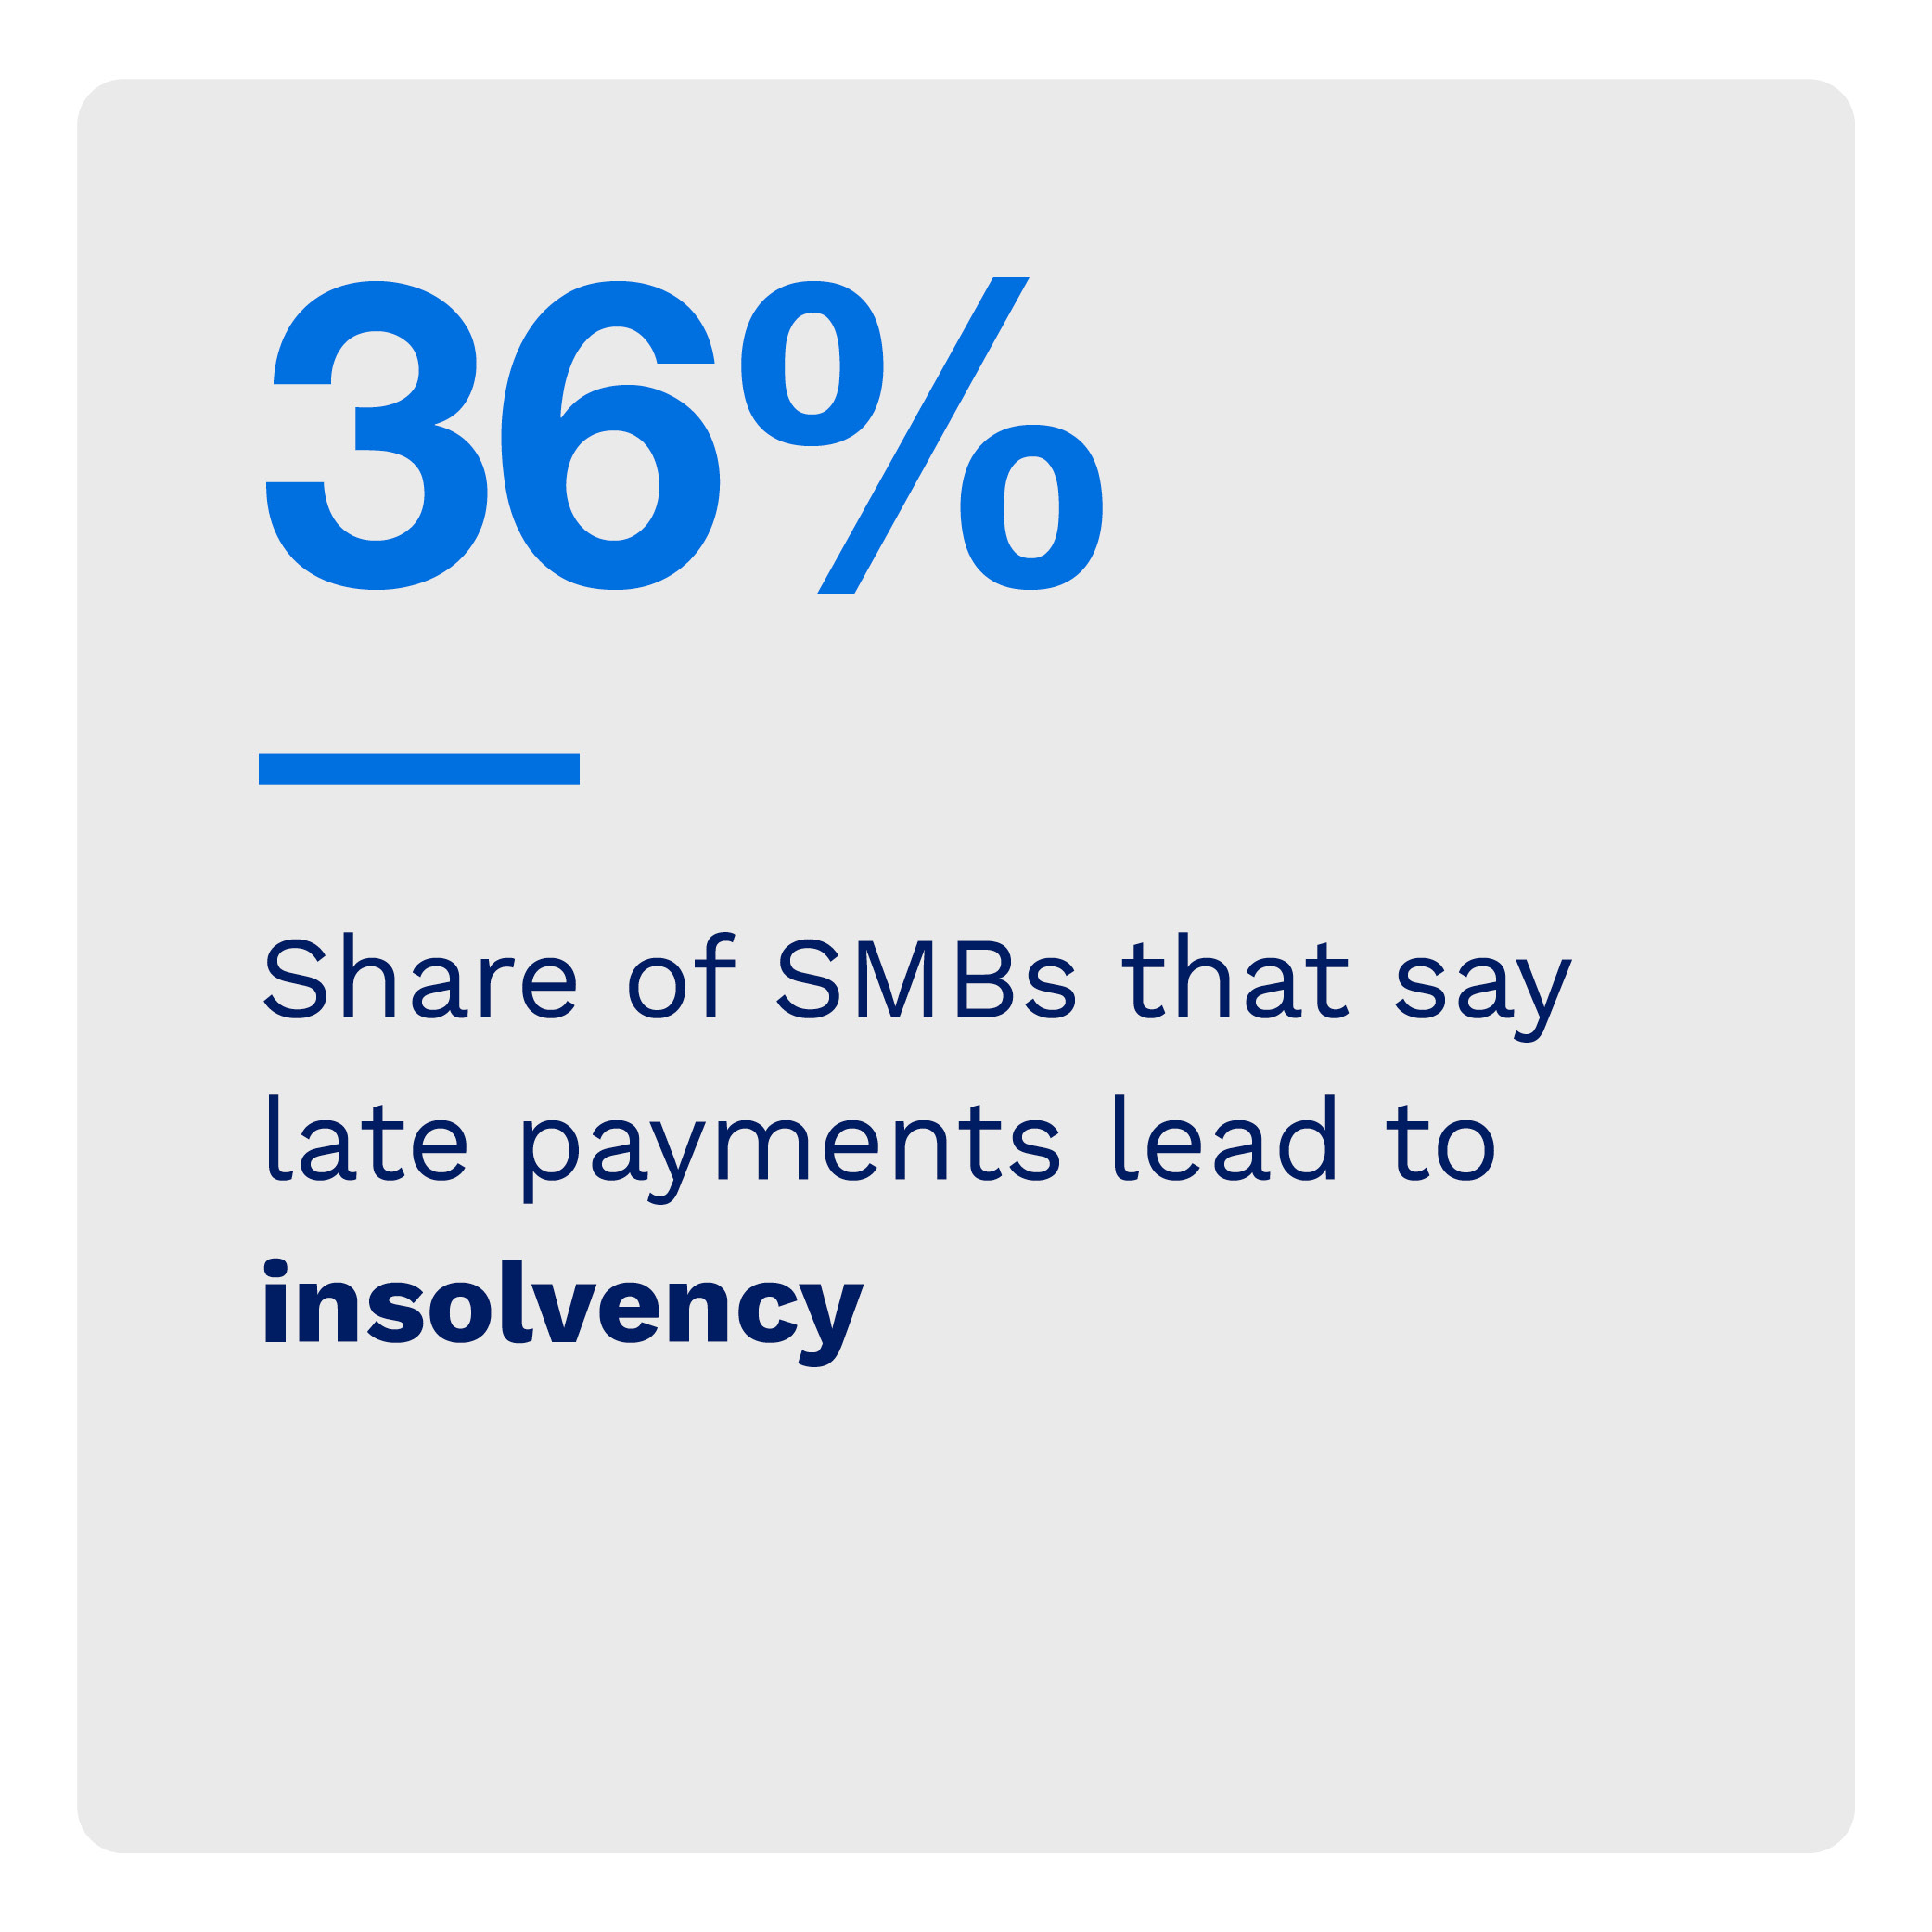 36%: Share of SMBs that say late payments lead to insolvency